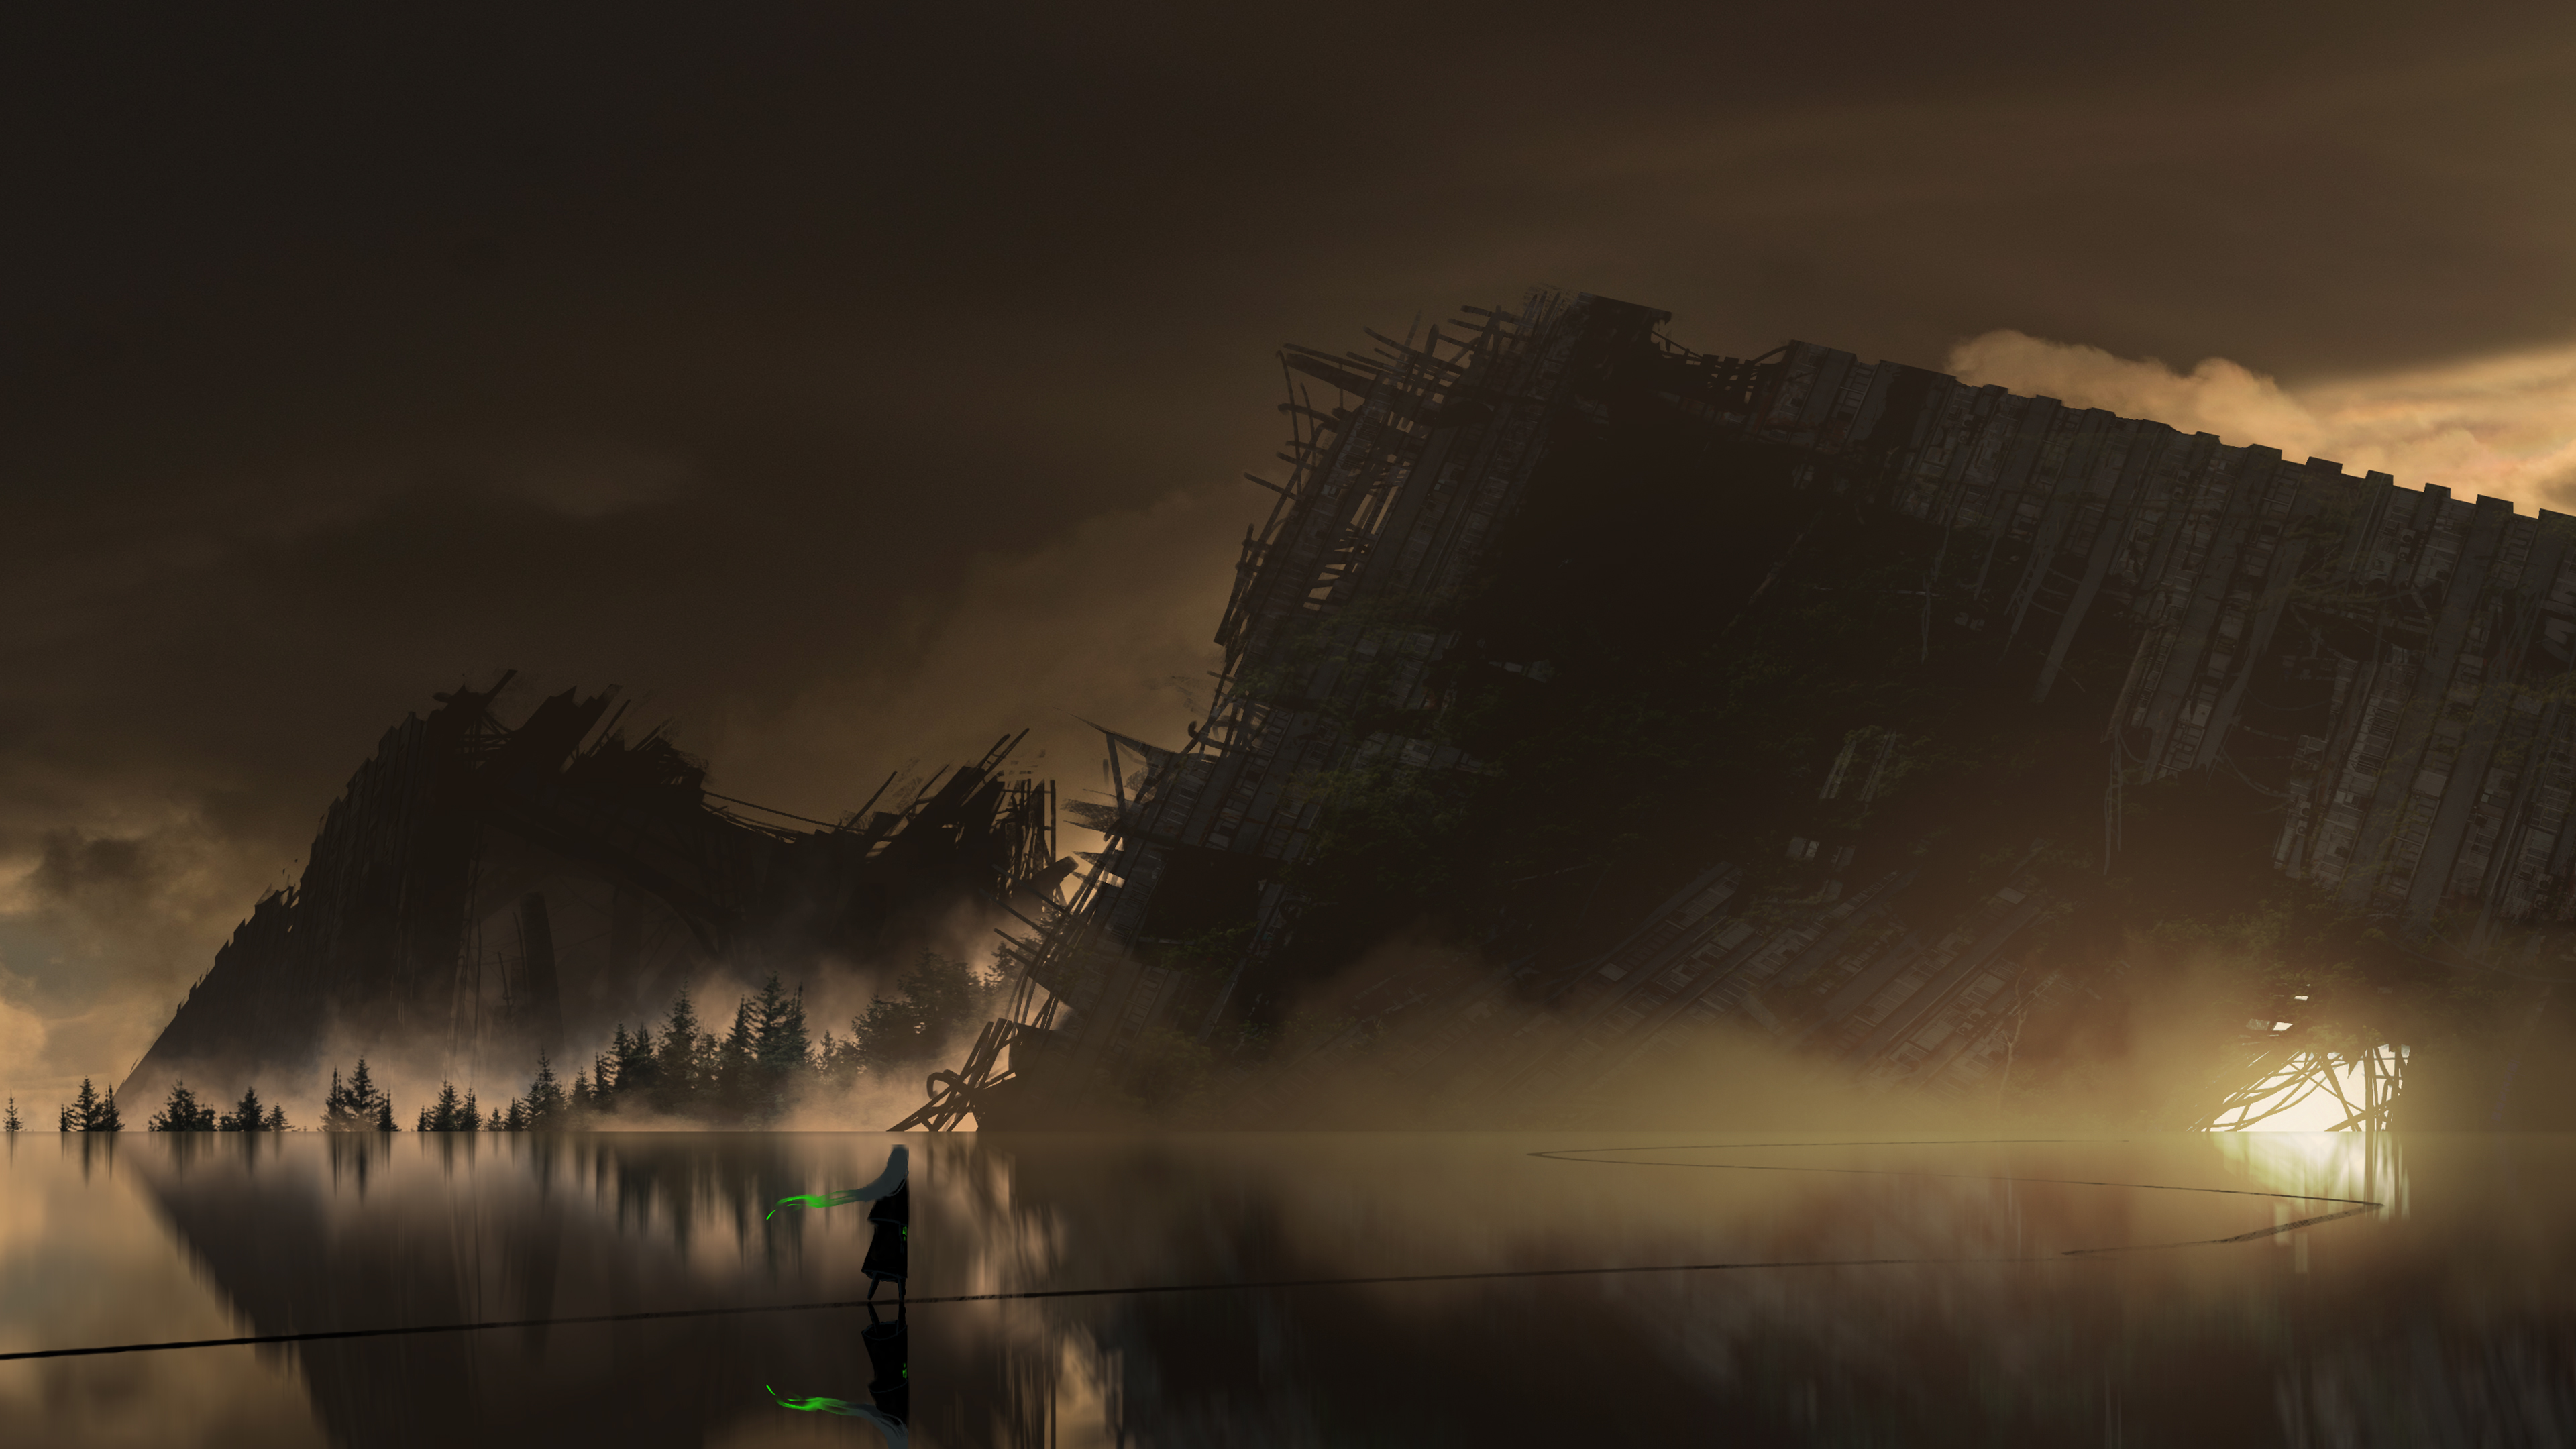 Anime Post Apocalyptic HD Wallpaper | Background Image